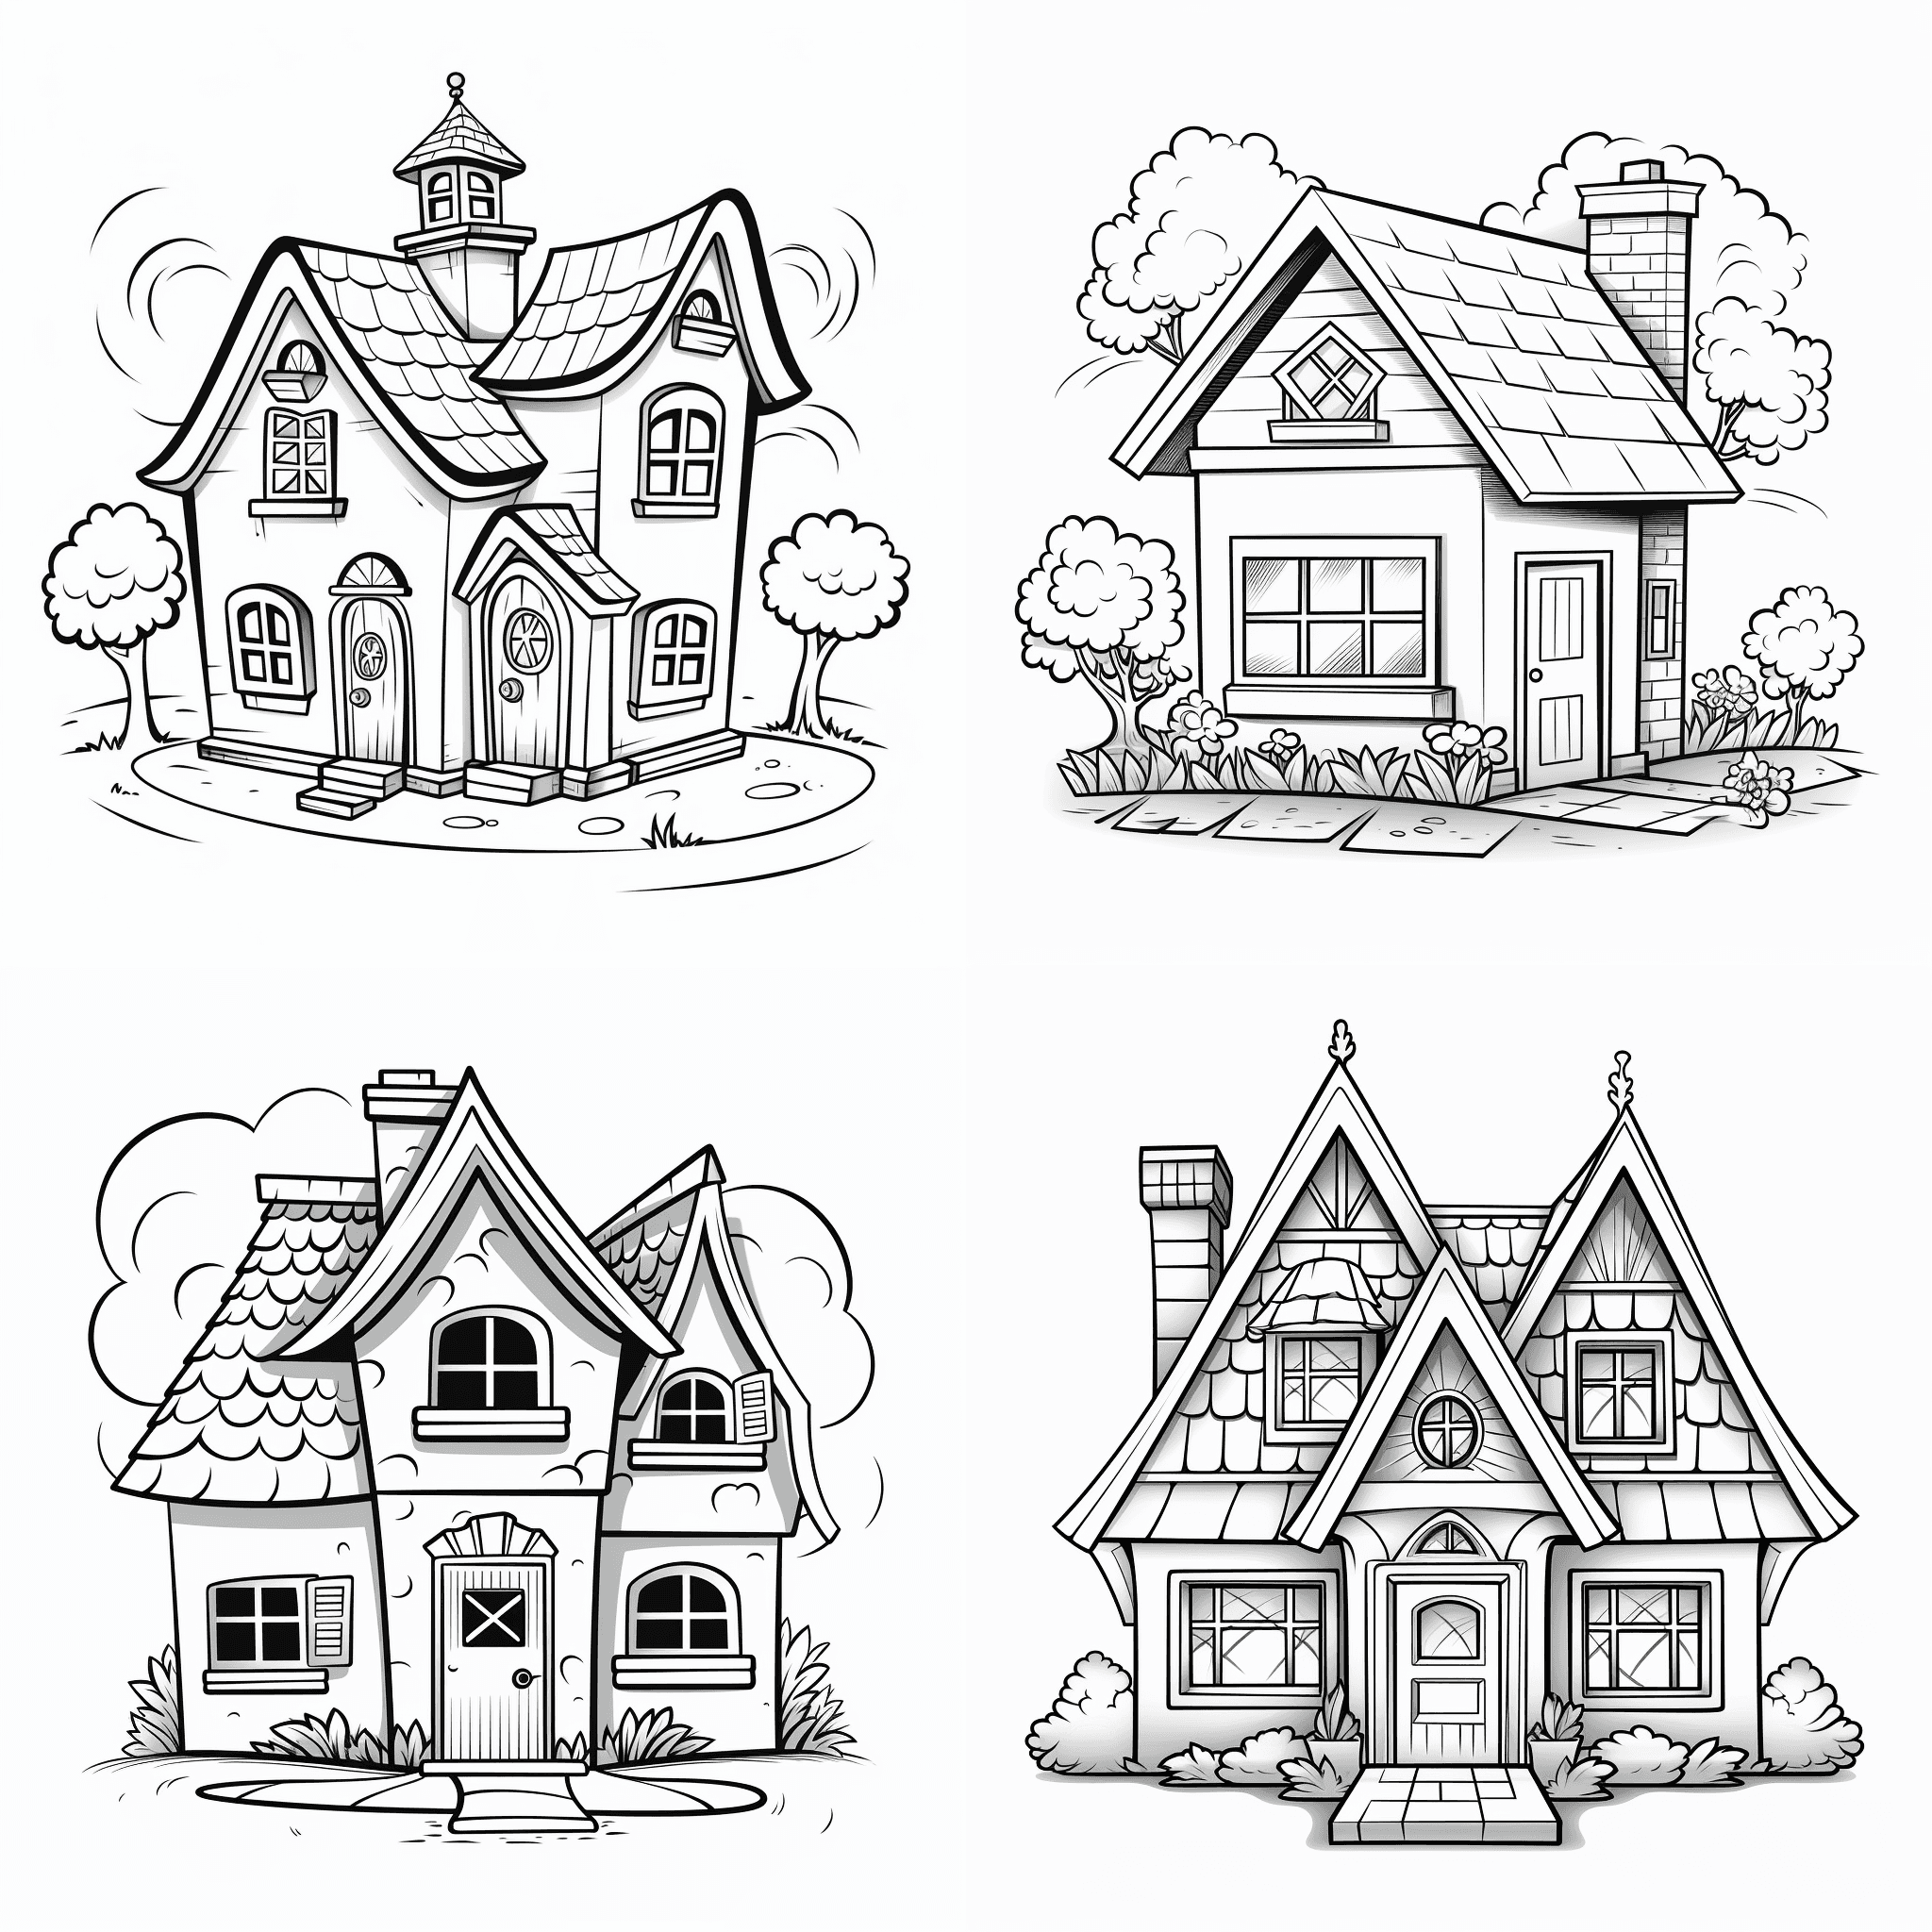 kid's coloring book, a house, cartoon, thick lines, black and white, white background